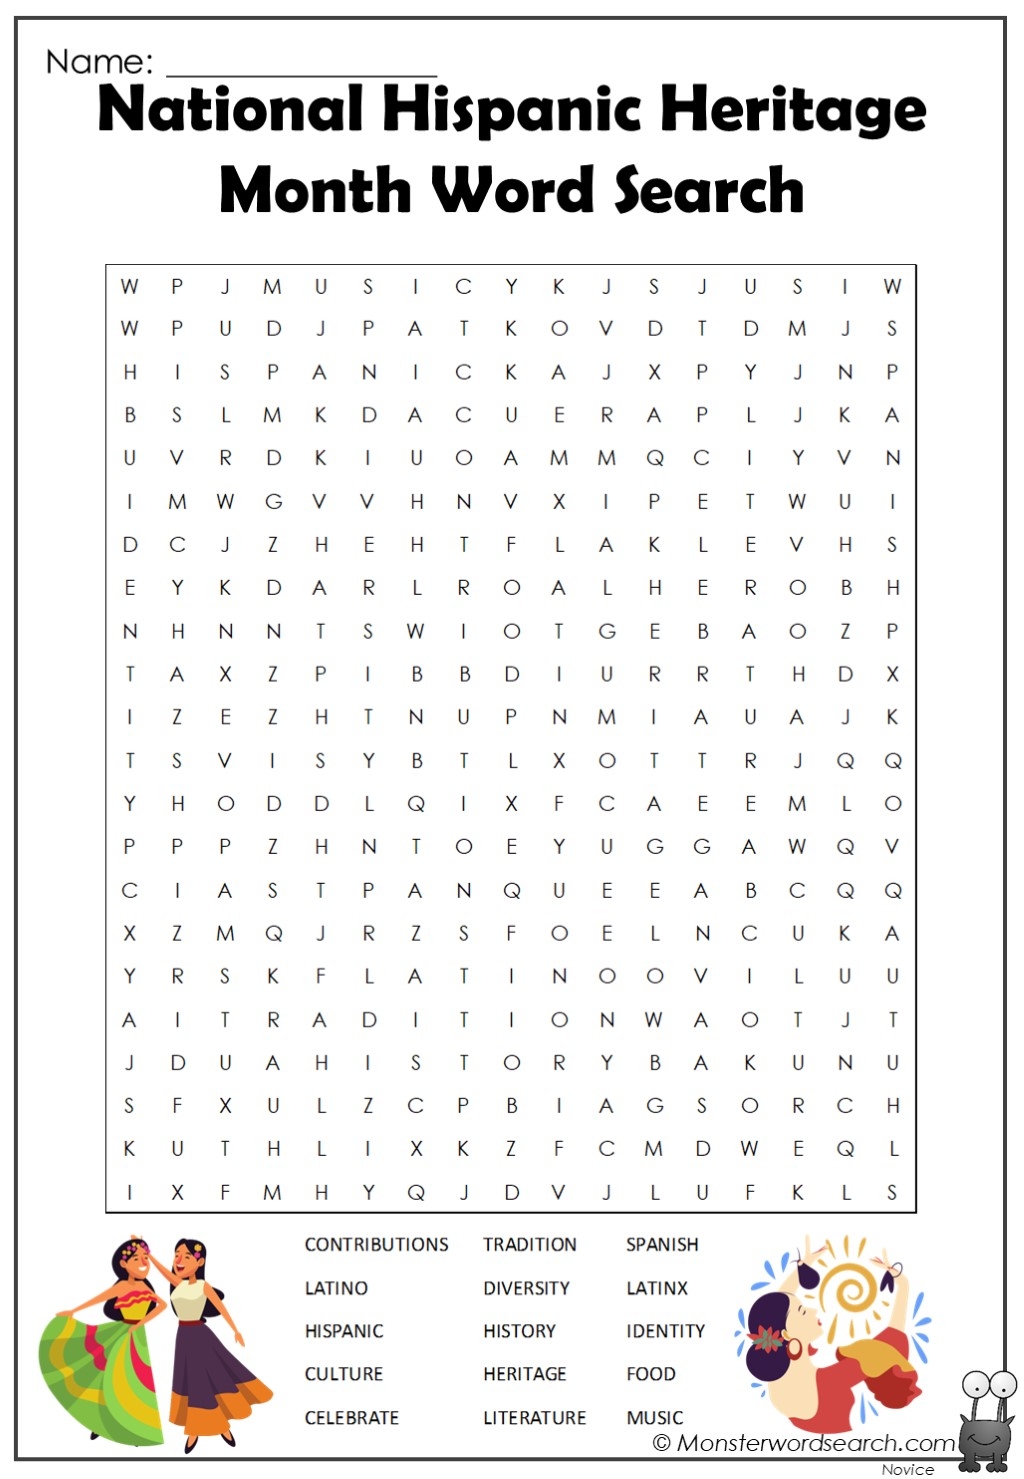 National Hispanic Heritage Month Word Search Monster Word Search